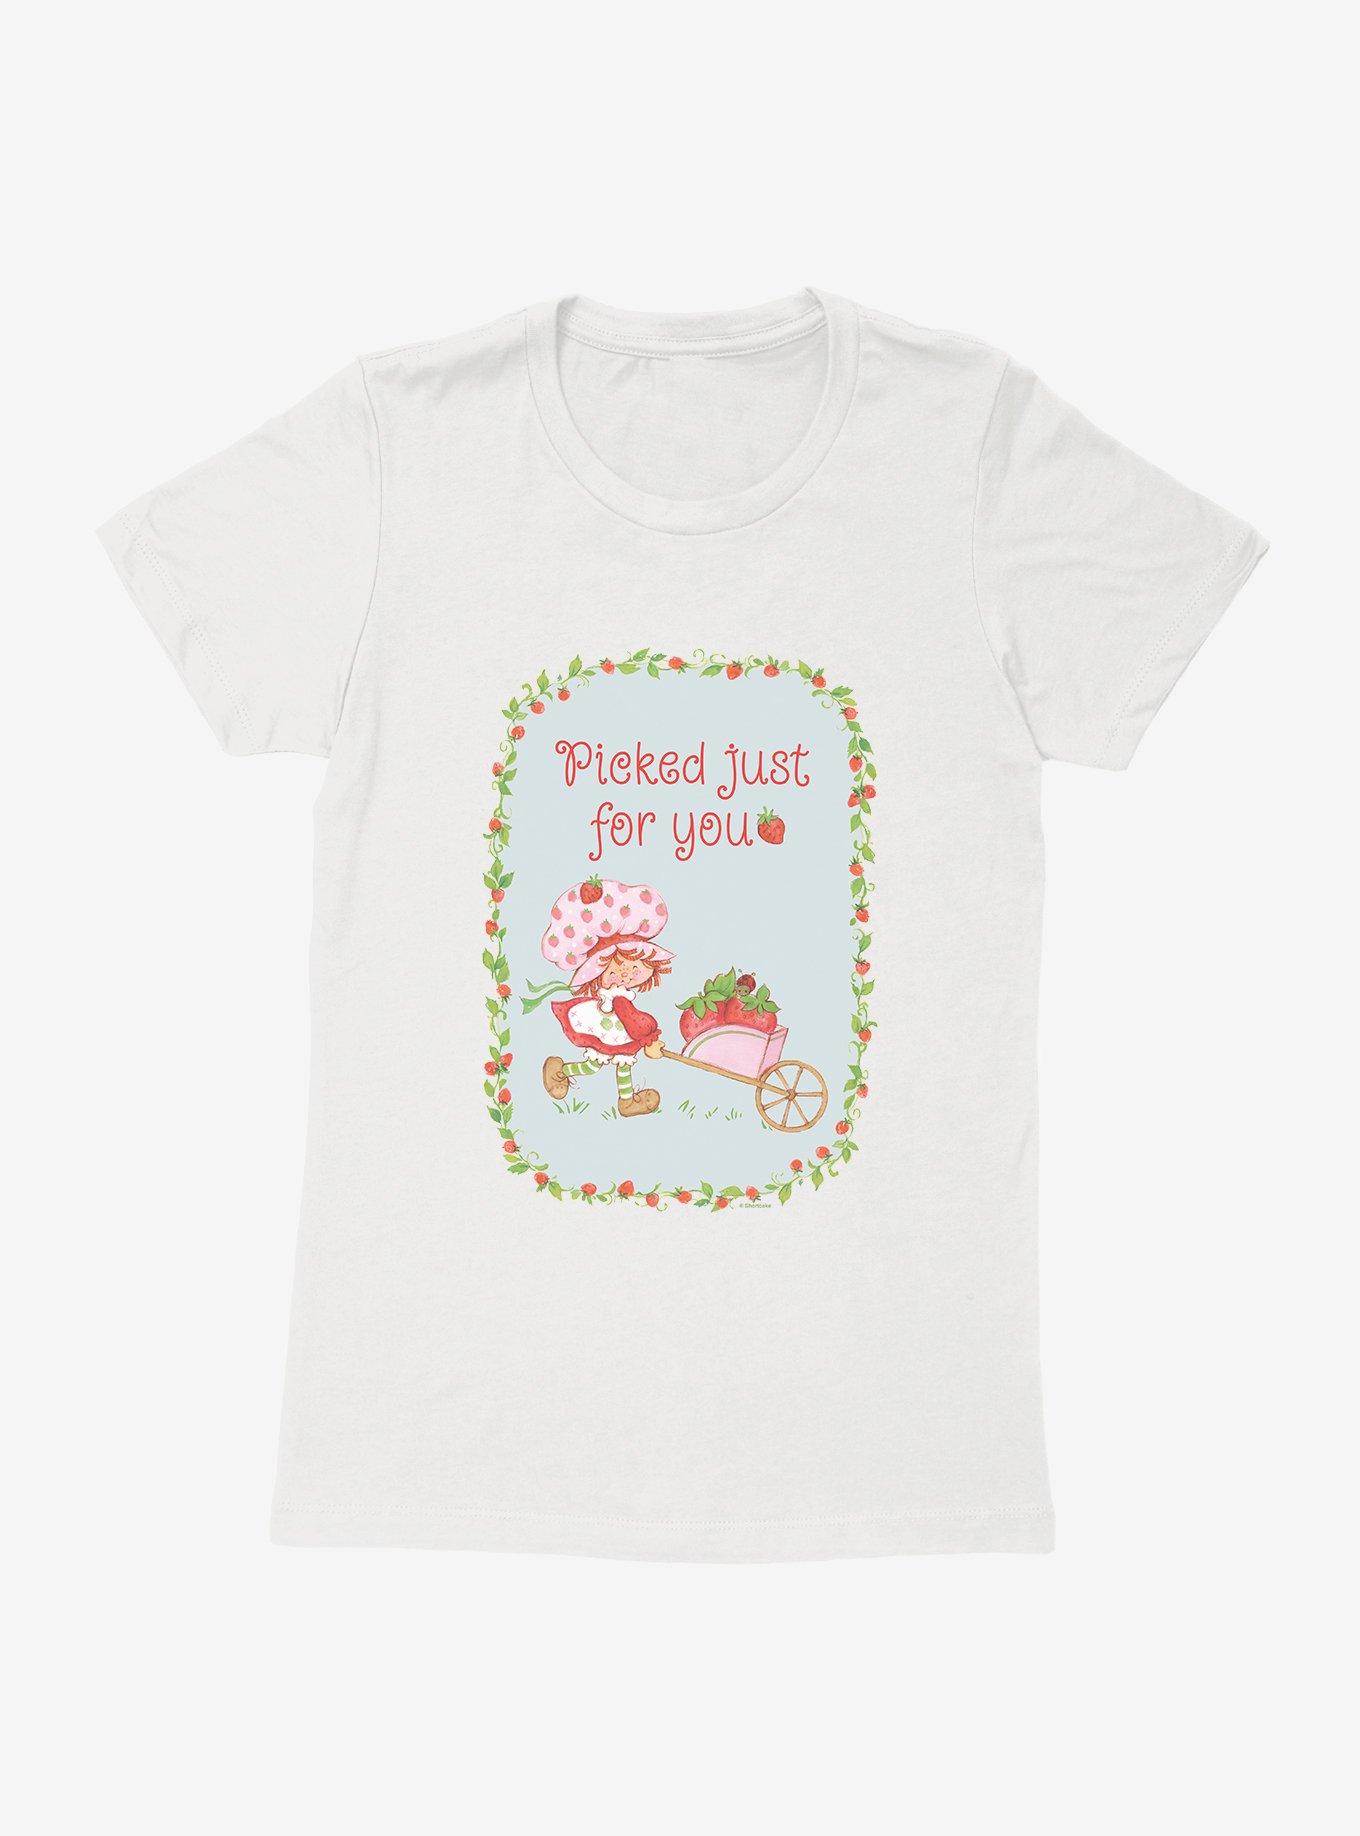 Strawberry Shortcake Picked Just For You Womens T-Shirt, WHITE, hi-res